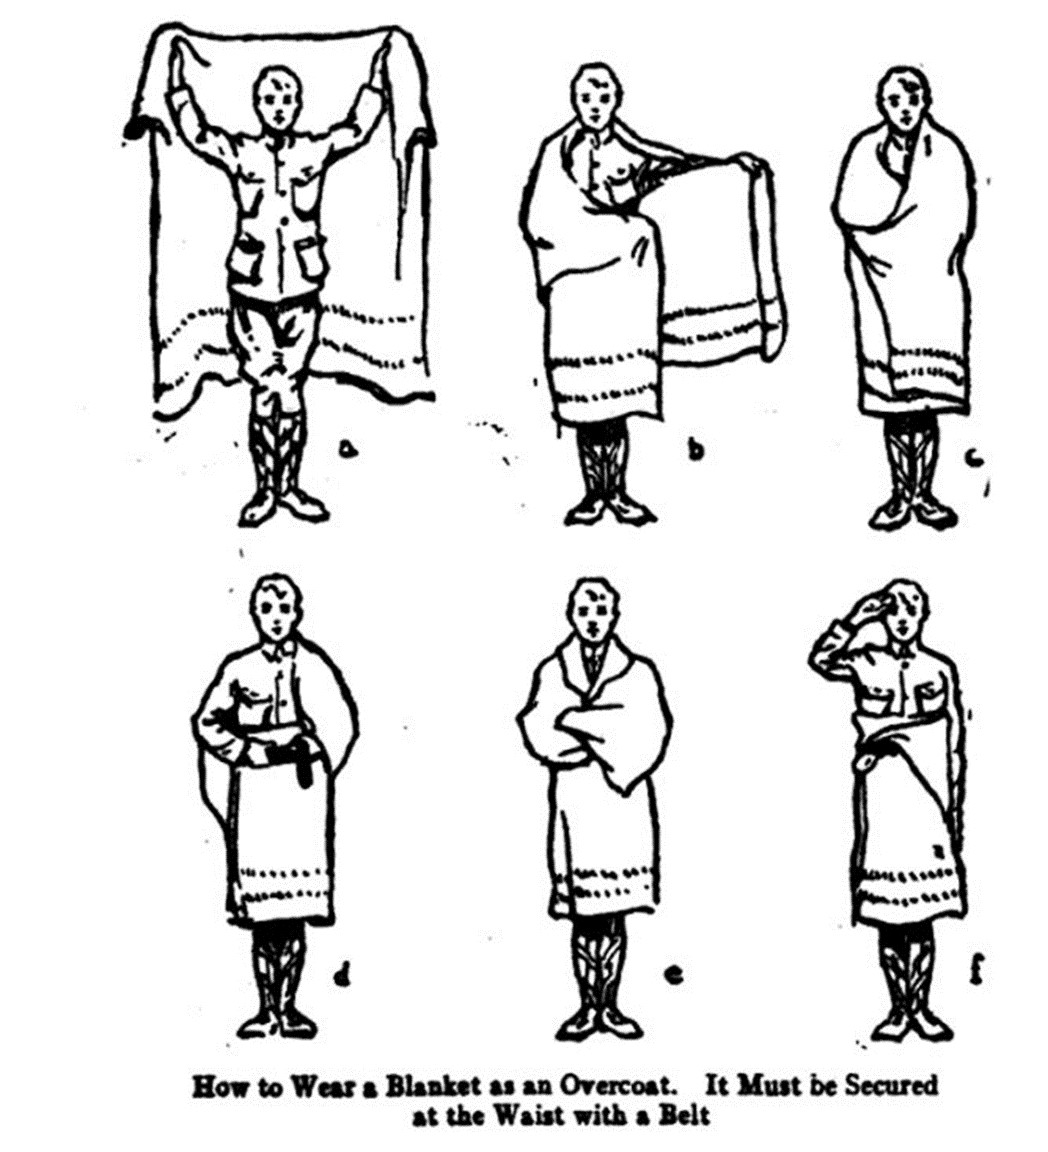 The Woodsman's Journal Online: How to Wear a Blanket as a Matchcoat